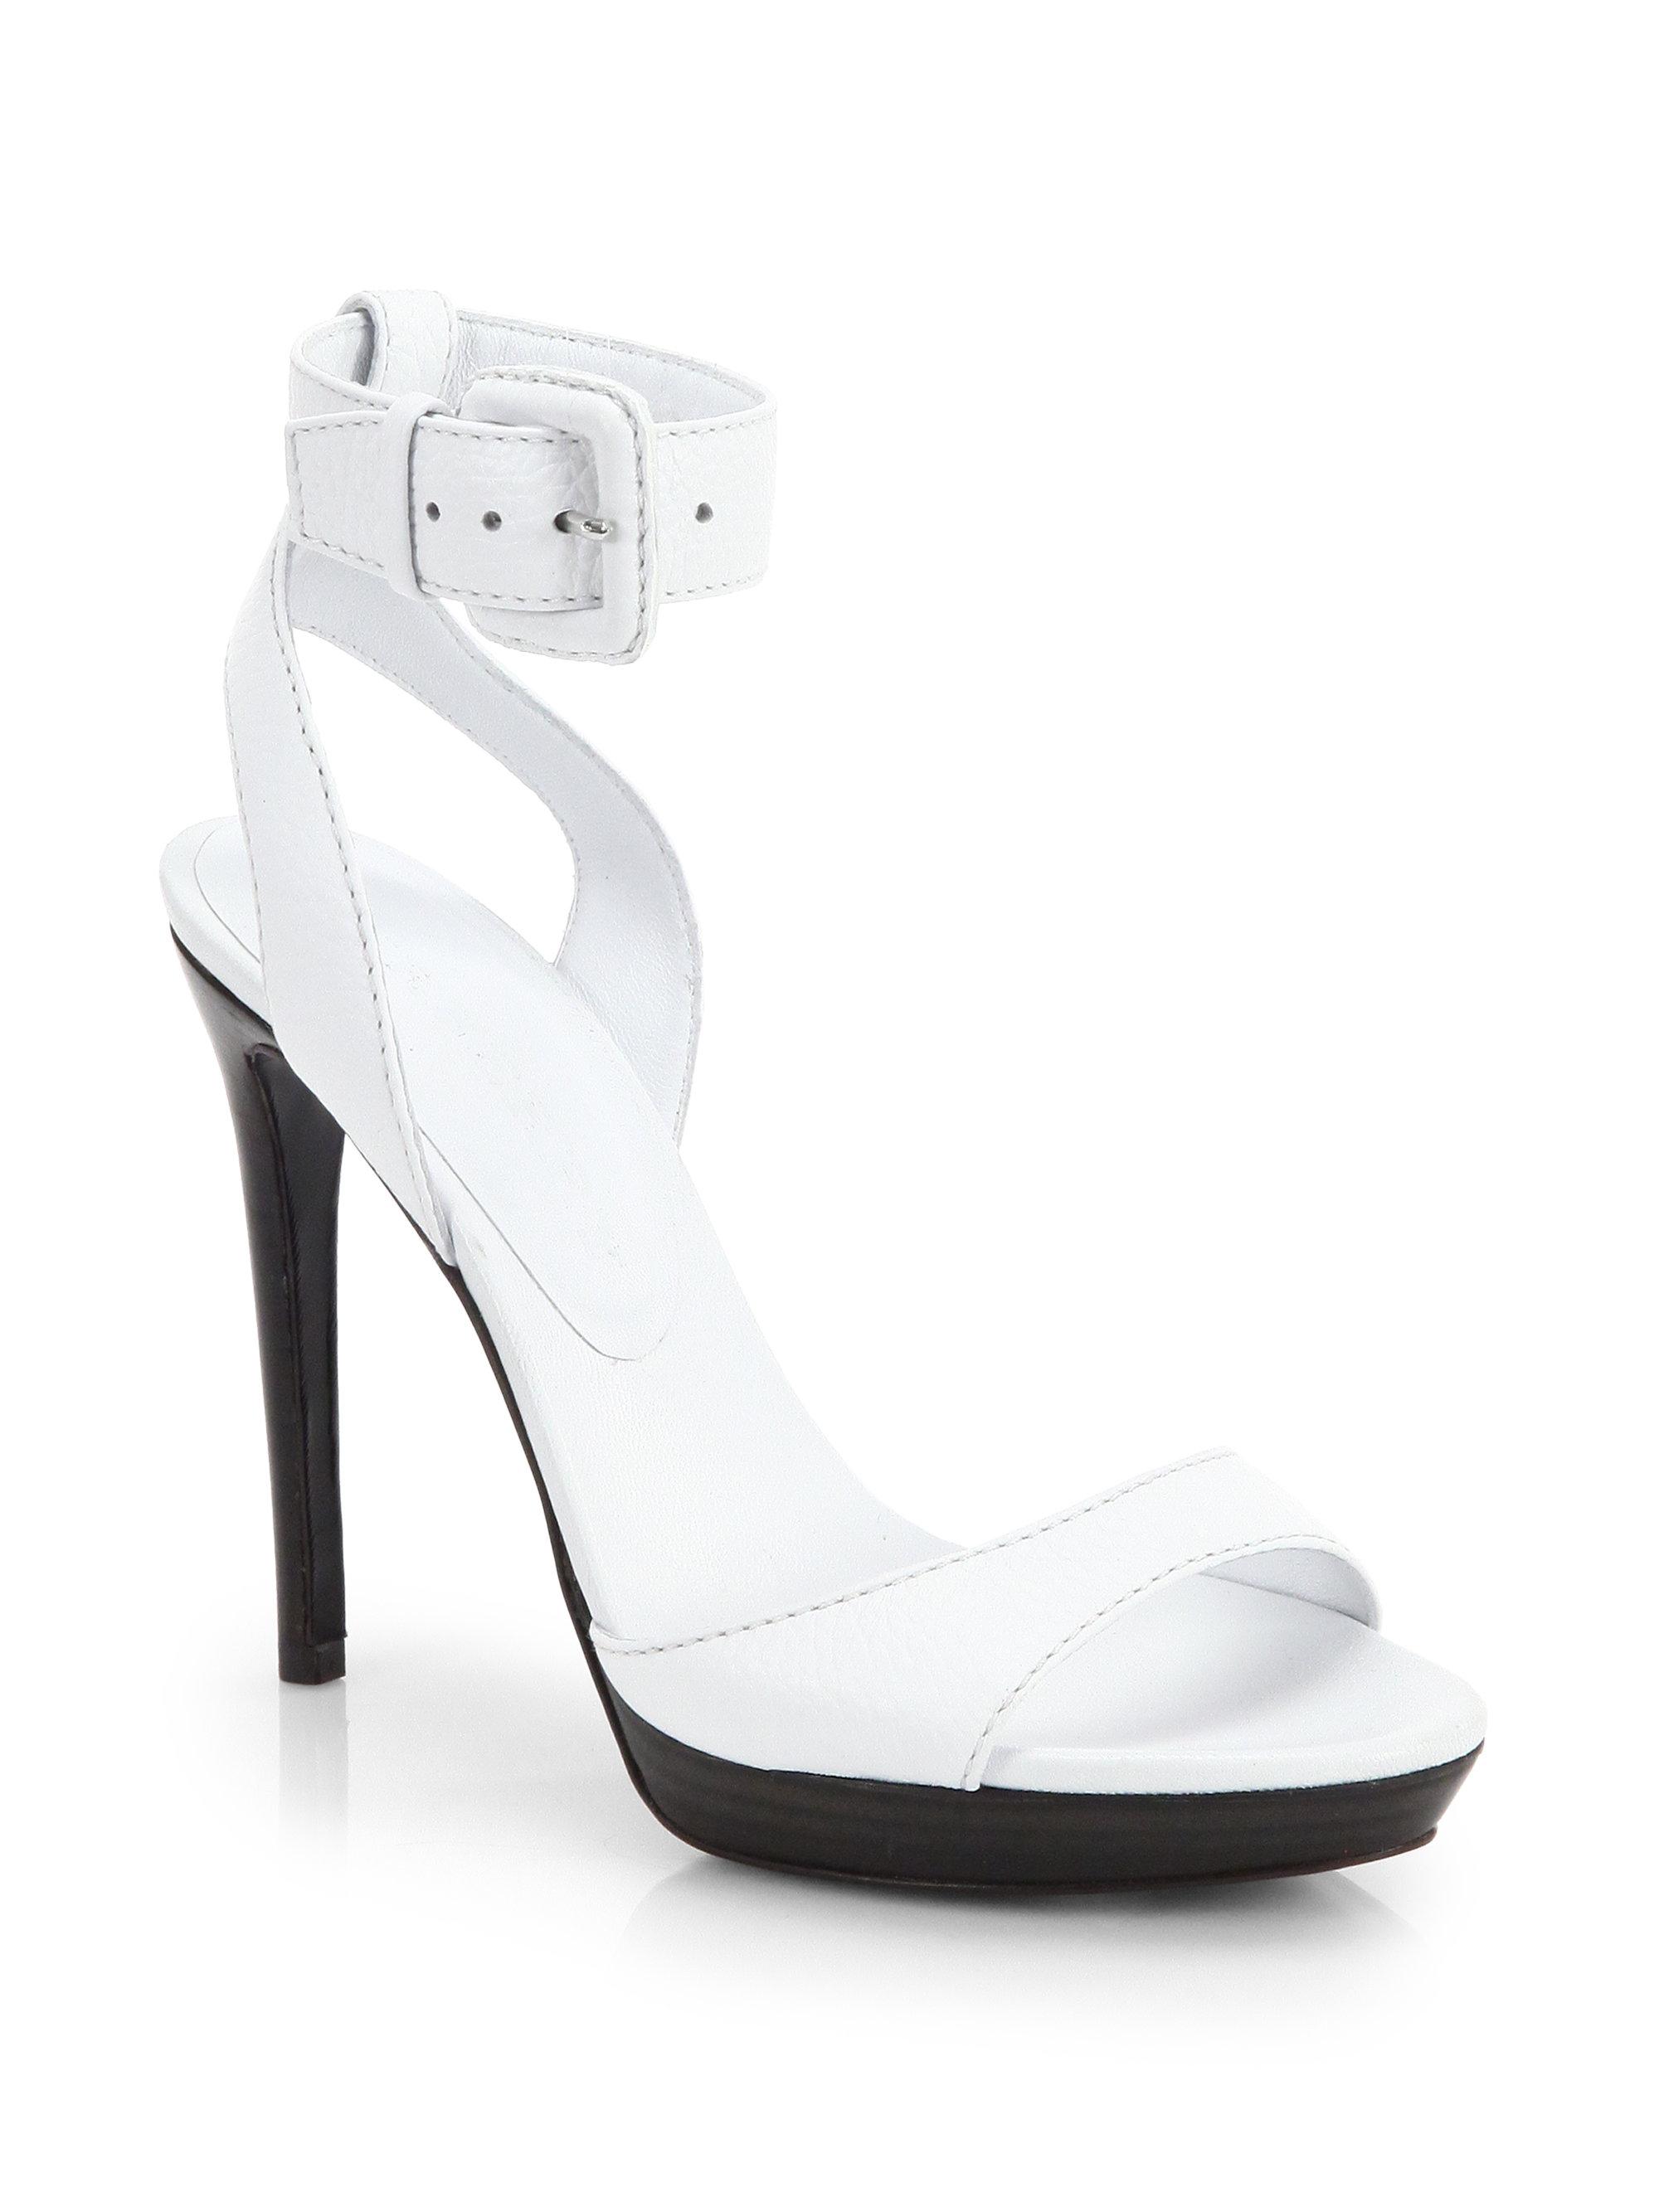 Burberry Alderney Leather High-heel Sandals in White (OFF WHITE) | Lyst